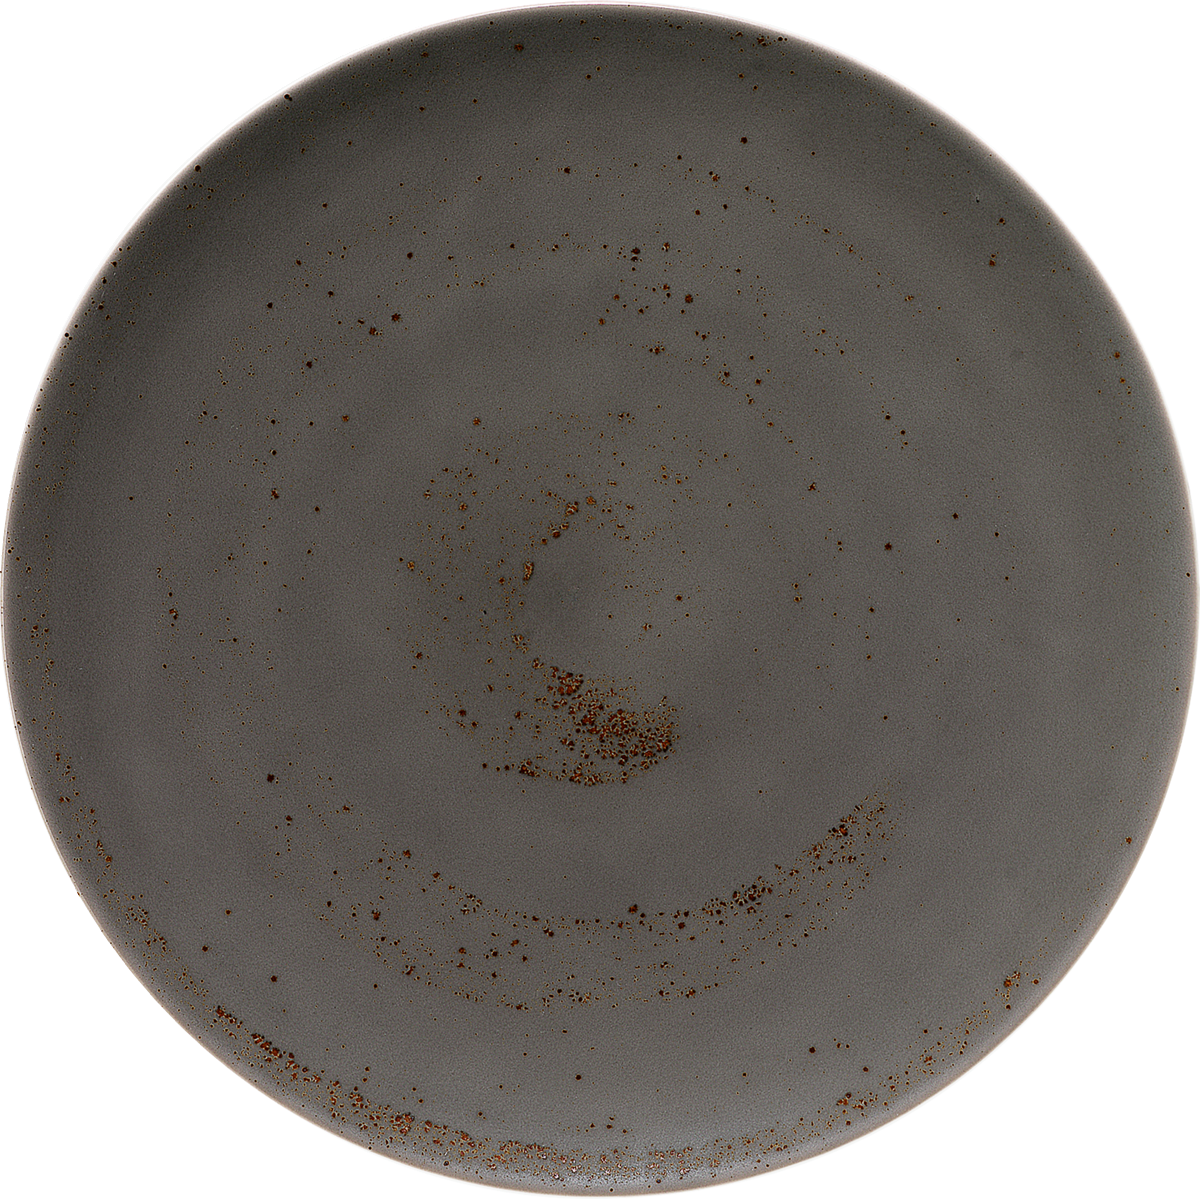 Plate flat round coupe 26cm